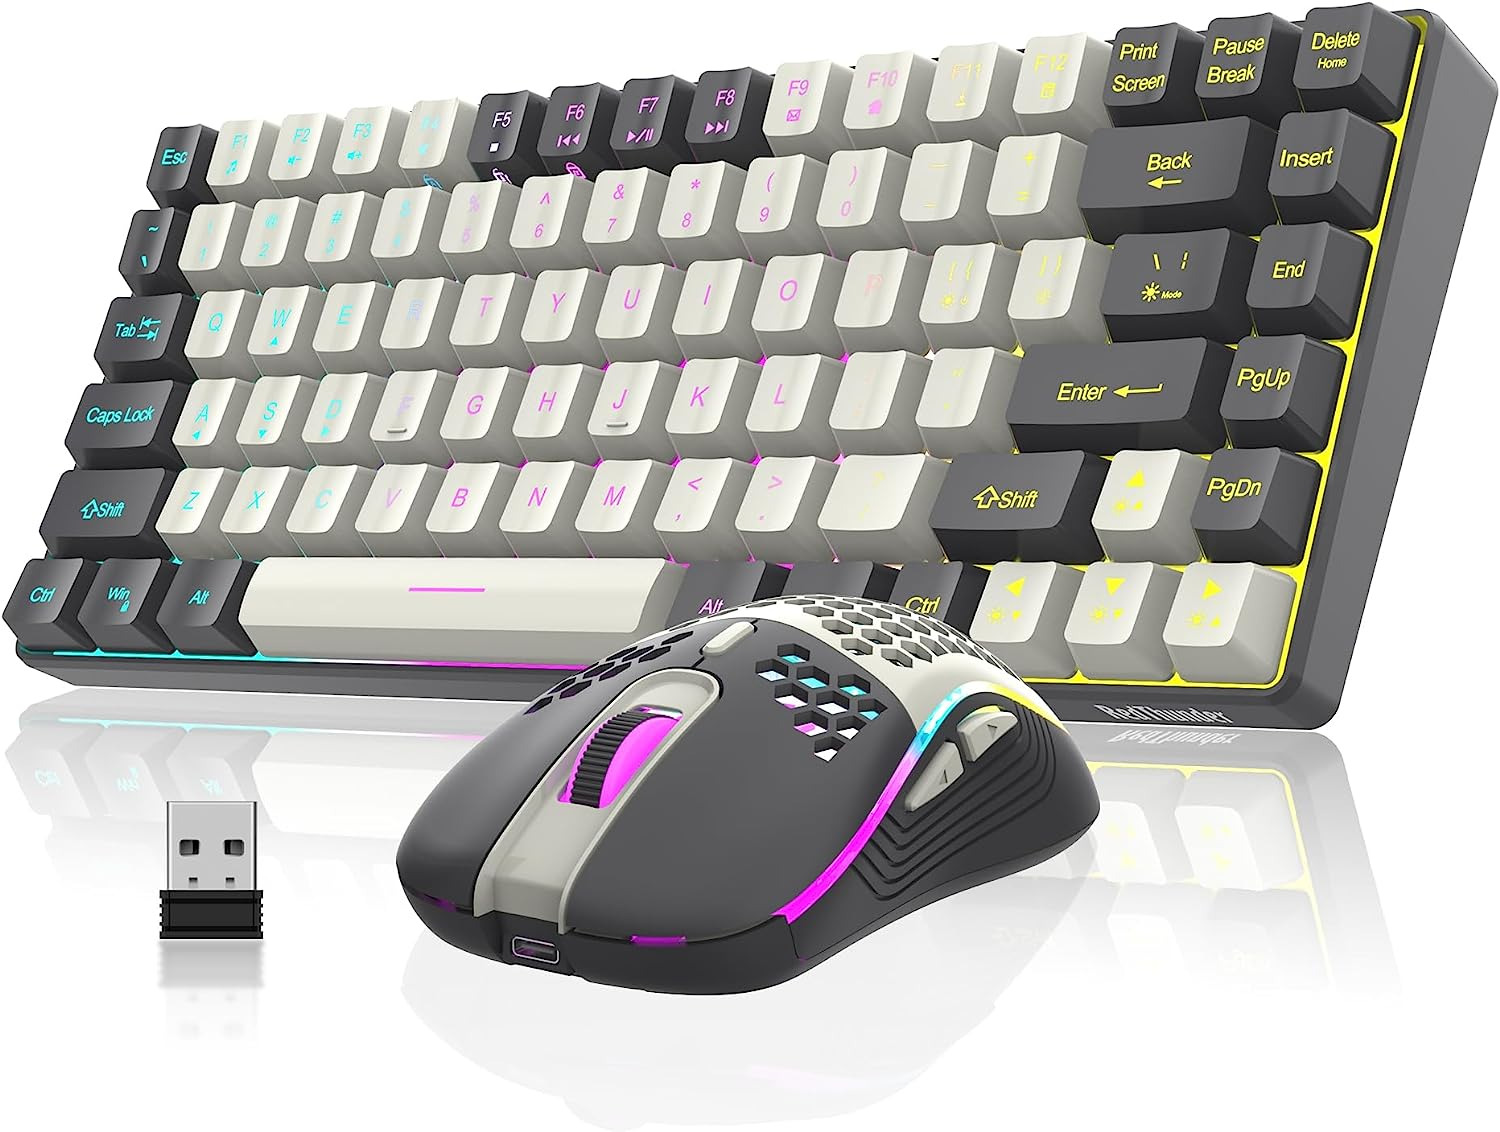 K84 Wireless Keyboard and Mouse Combo, RGB Backlit Rechargeable Battery, 75% Lay